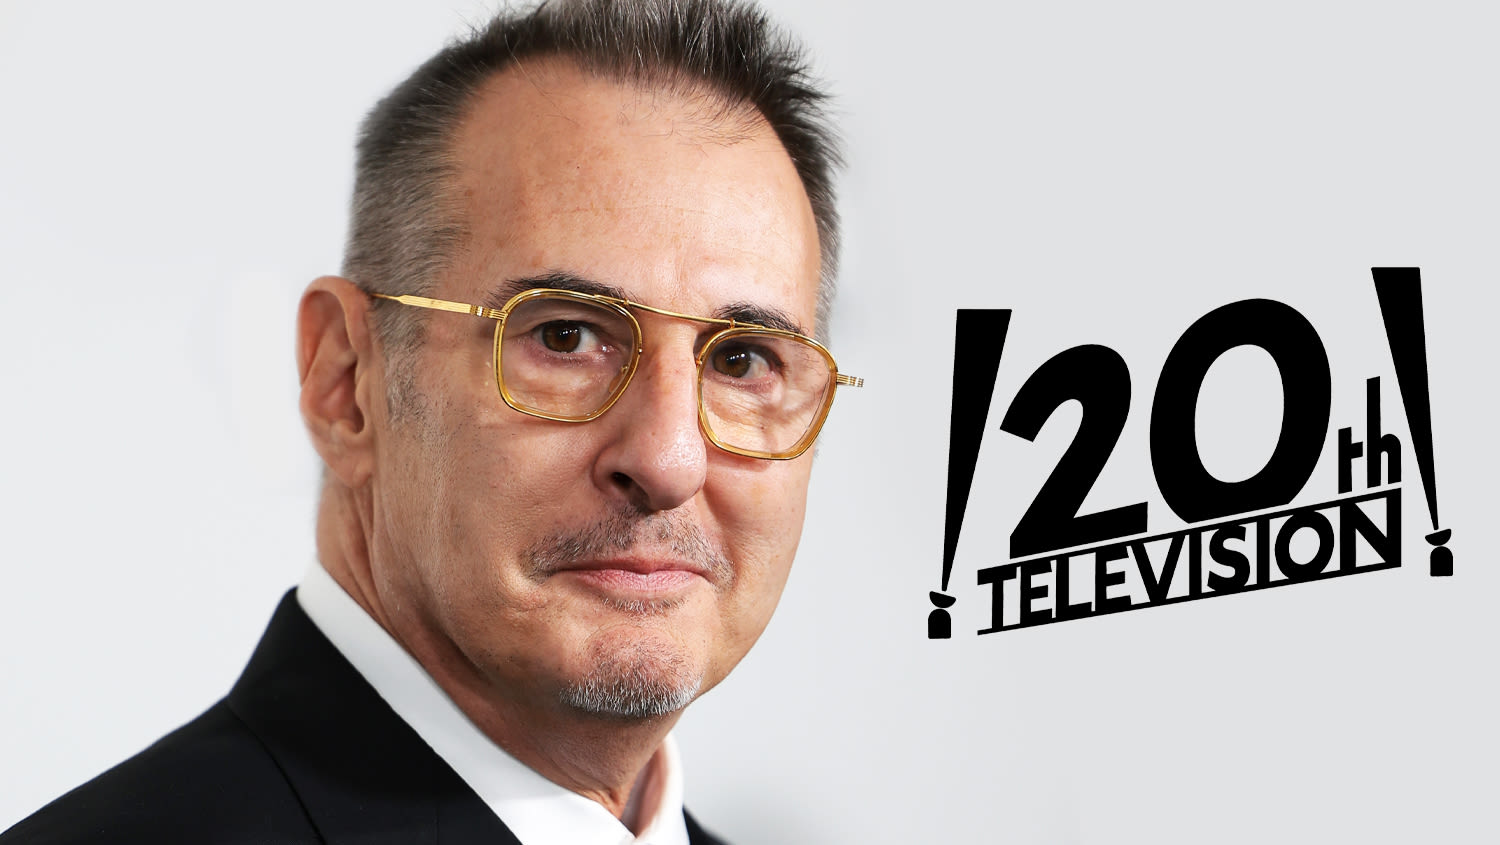 Jon Robin Baitz Inks Overall Deal With 20th Television